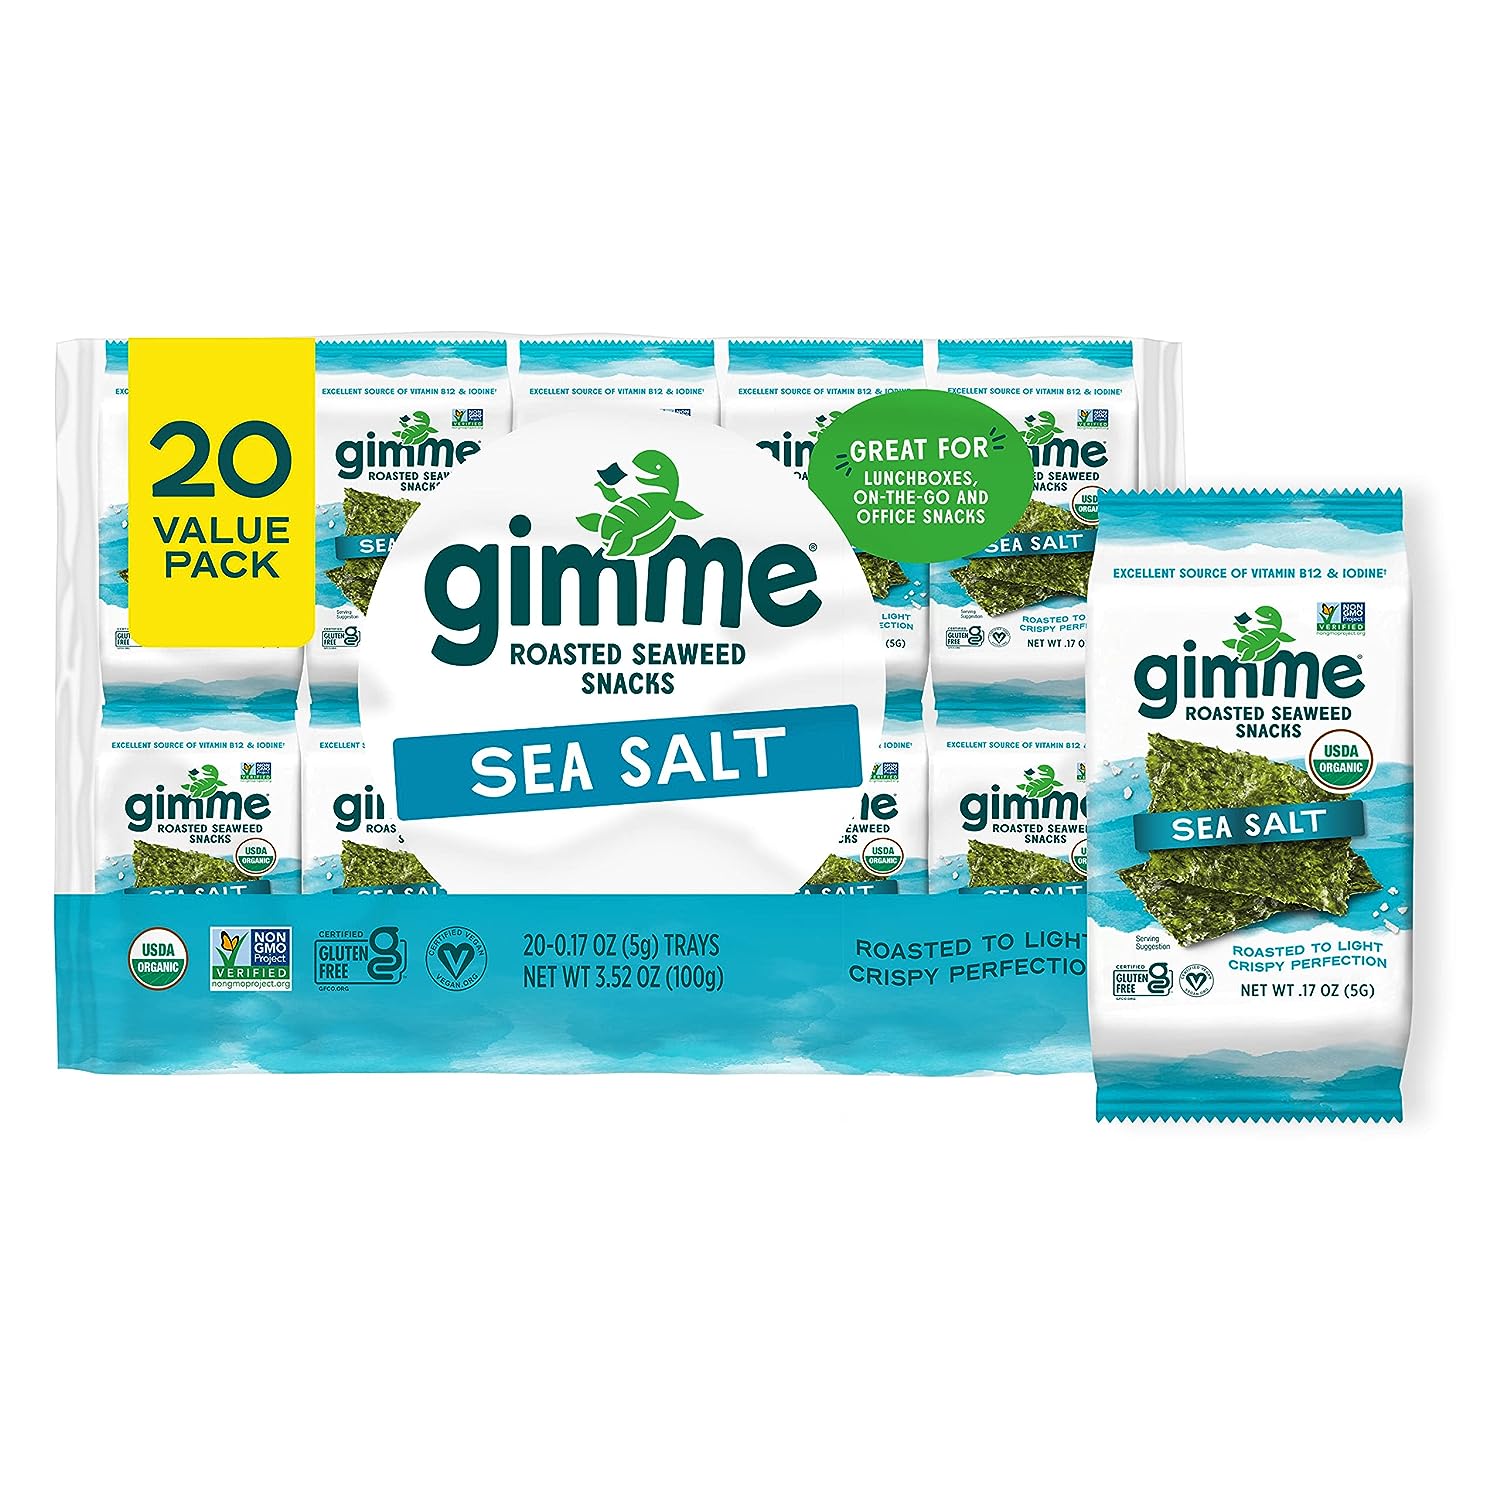 gimMe - Sea Salt - 20 Count - Organic Roasted Seaweed Sheets - Keto, Vegan, Gluten Free - Great Source of Iodine & Omega 3’s - Healthy On-The-Go Snack for Kids & Adults